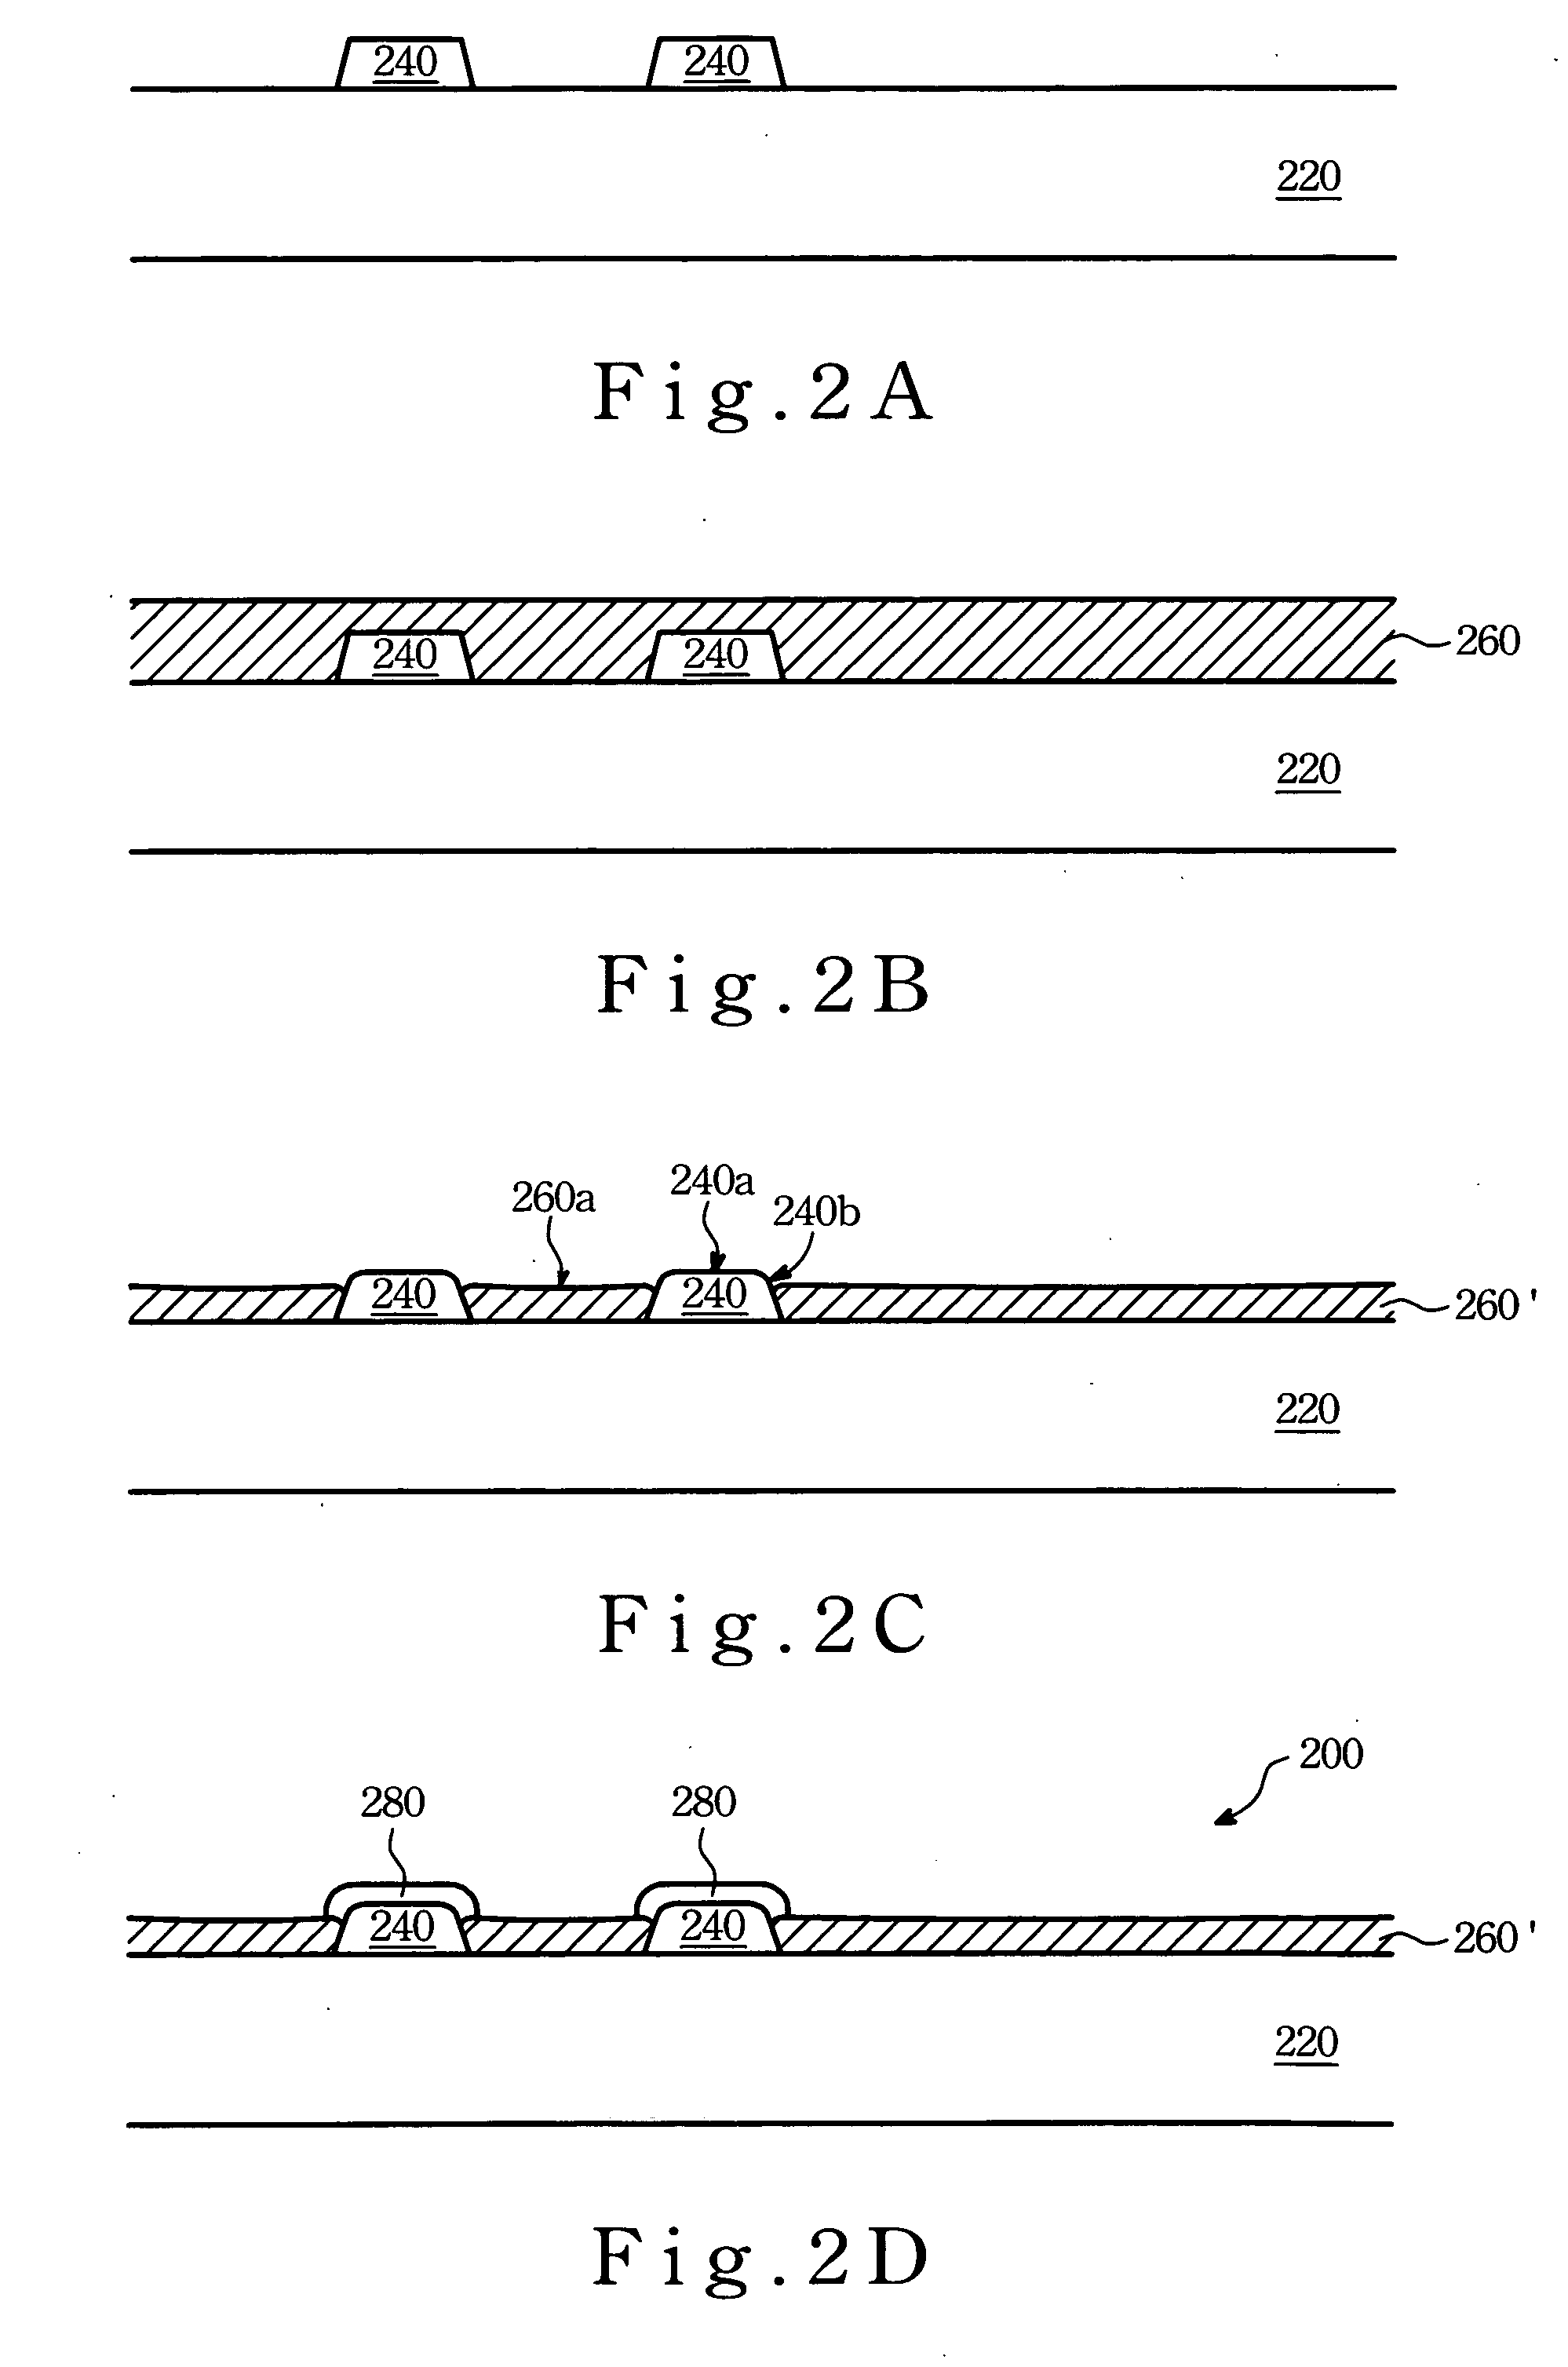 Fine-pitch packaging substrate and a method of forming the same